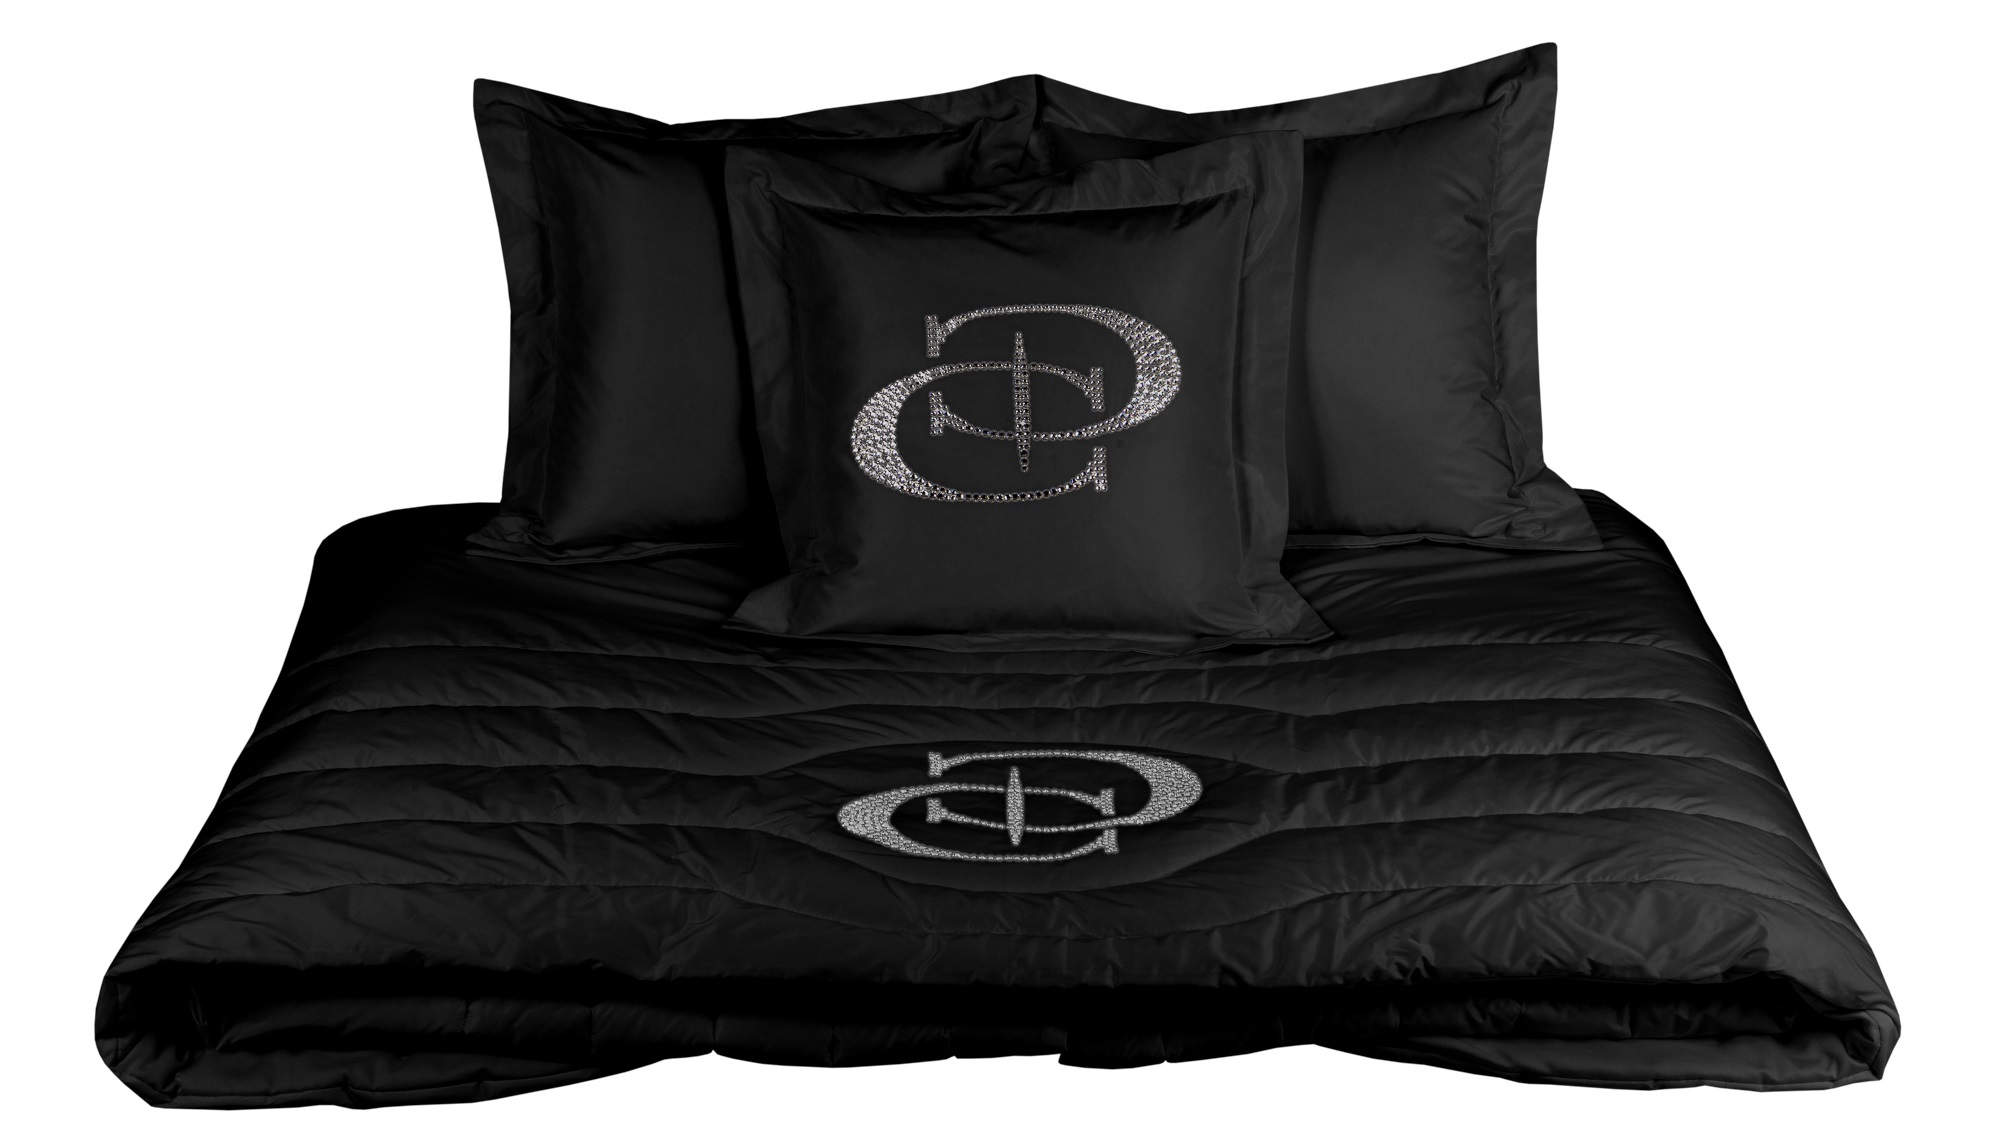 Bedroom Black Collection for Him